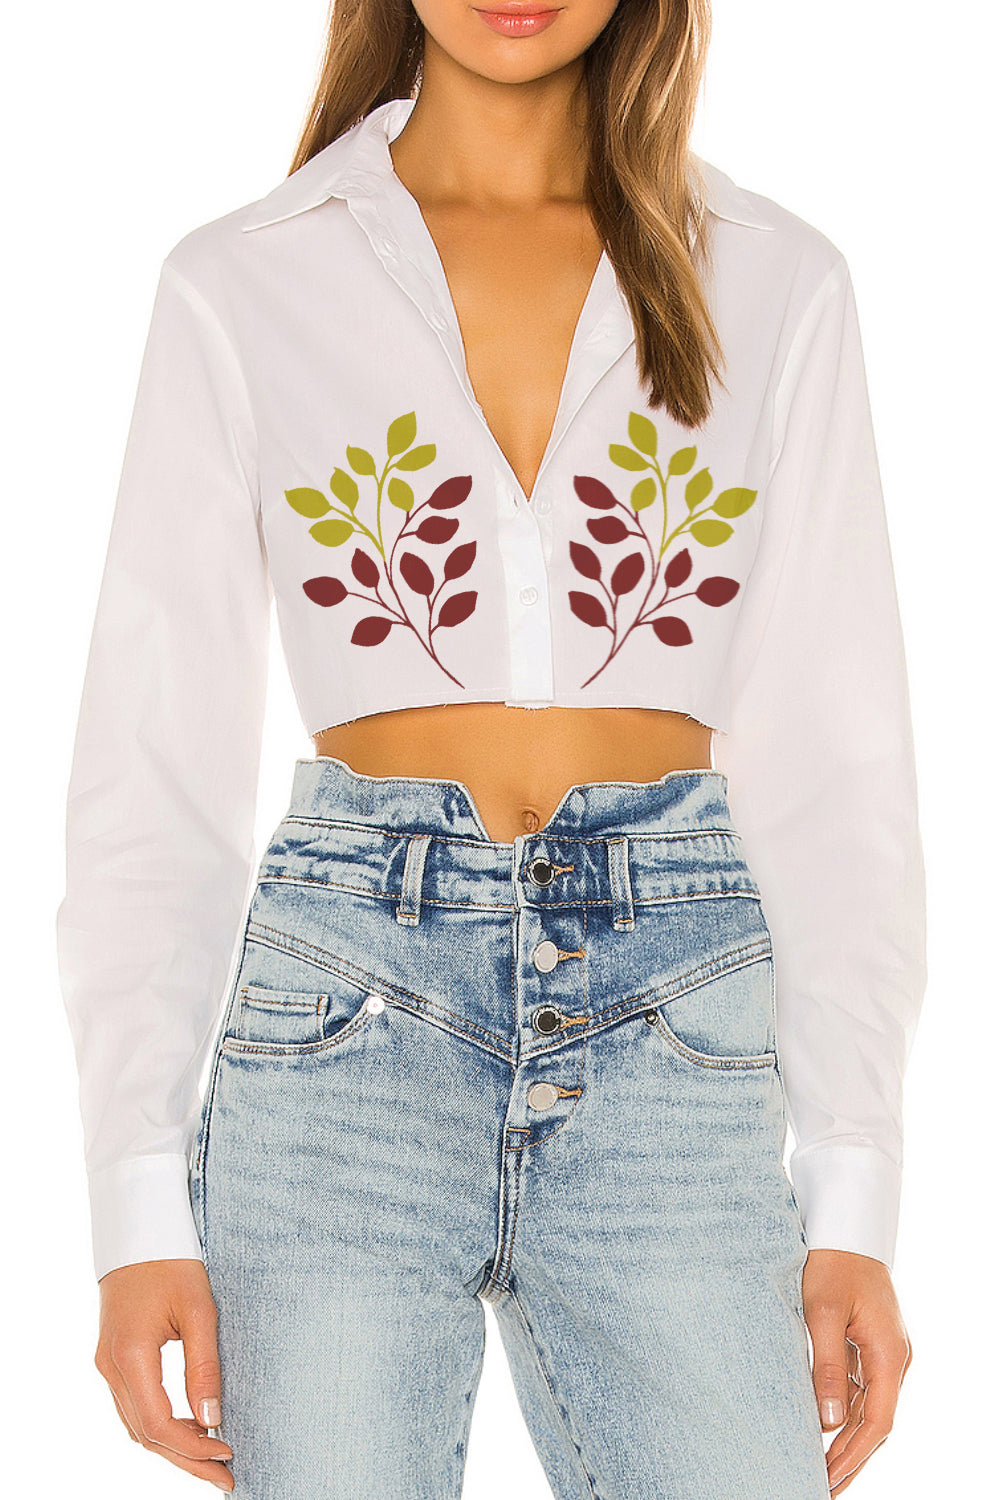 Form fitted crop top white